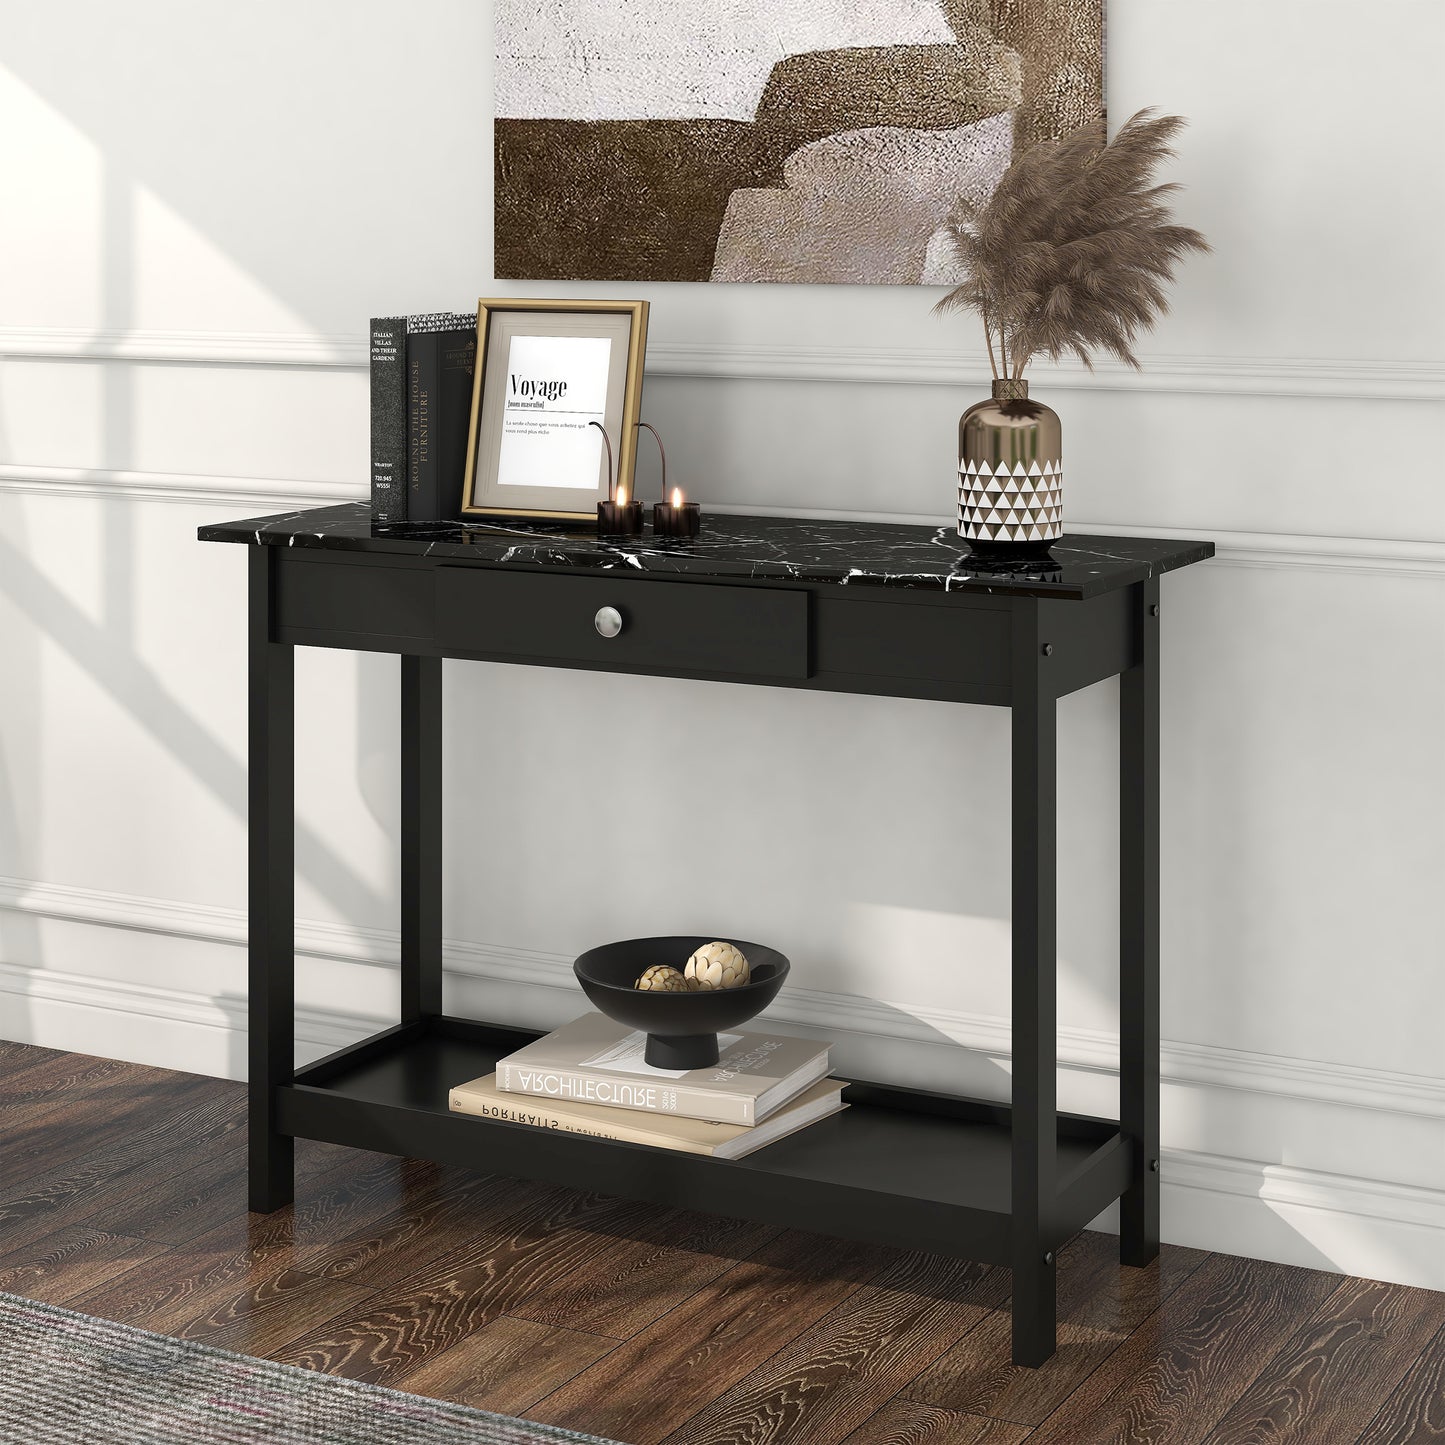 Left angled modern black and faux marble one-drawer console table with a lower shelf in a living area with accessories